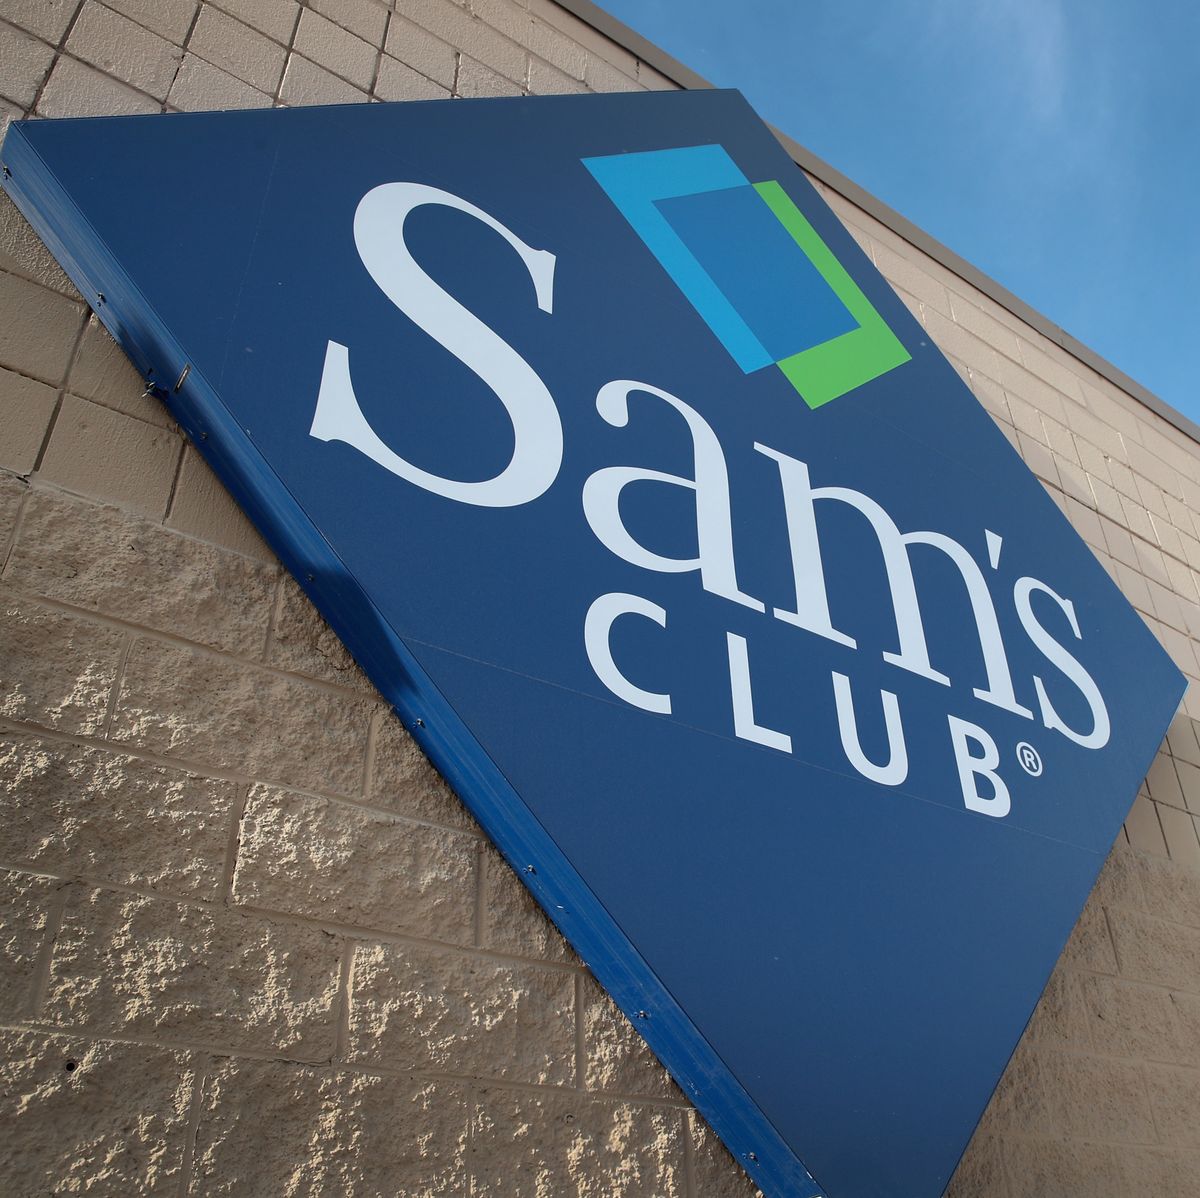 Is Sam's Club Open on July 4 2022? - Sam's Club 4th of July Hours